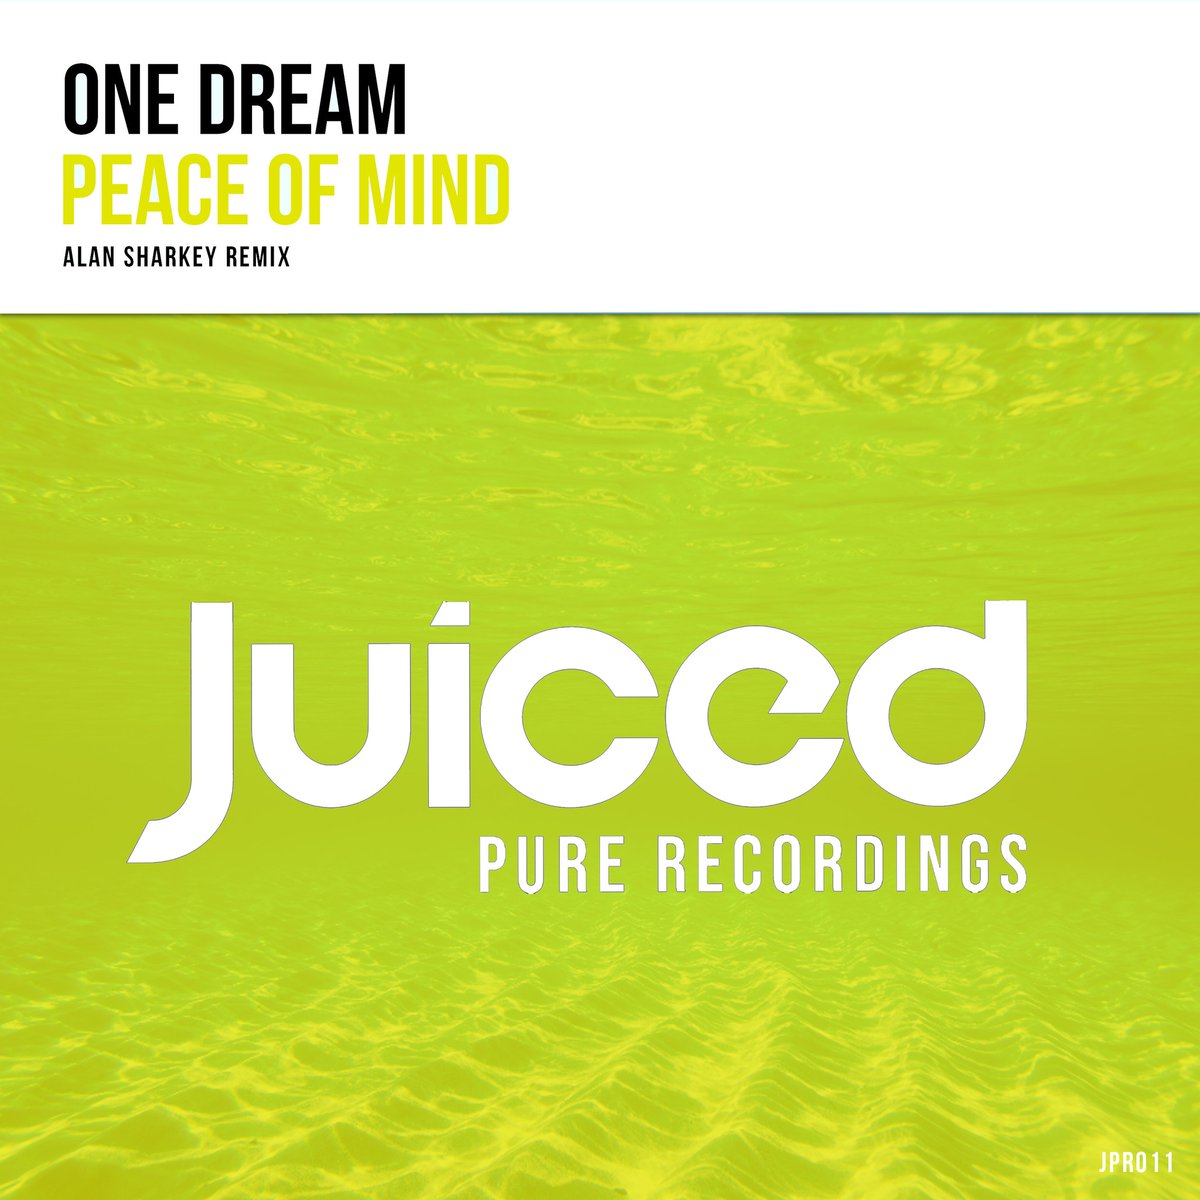 Out Friday 26th April @beatport Exclusive One Dream - Peace Of Mind (Alan Sharkey Remix) Preview: juiceddigital.ampsuite.com/releases/links… Released by: Juiced Pure #trance #trancefamily #fypシ゚ #techtrance #upliftingtrance #juicedpure #releaseday #beatport #juiceddigital #vocaltrance